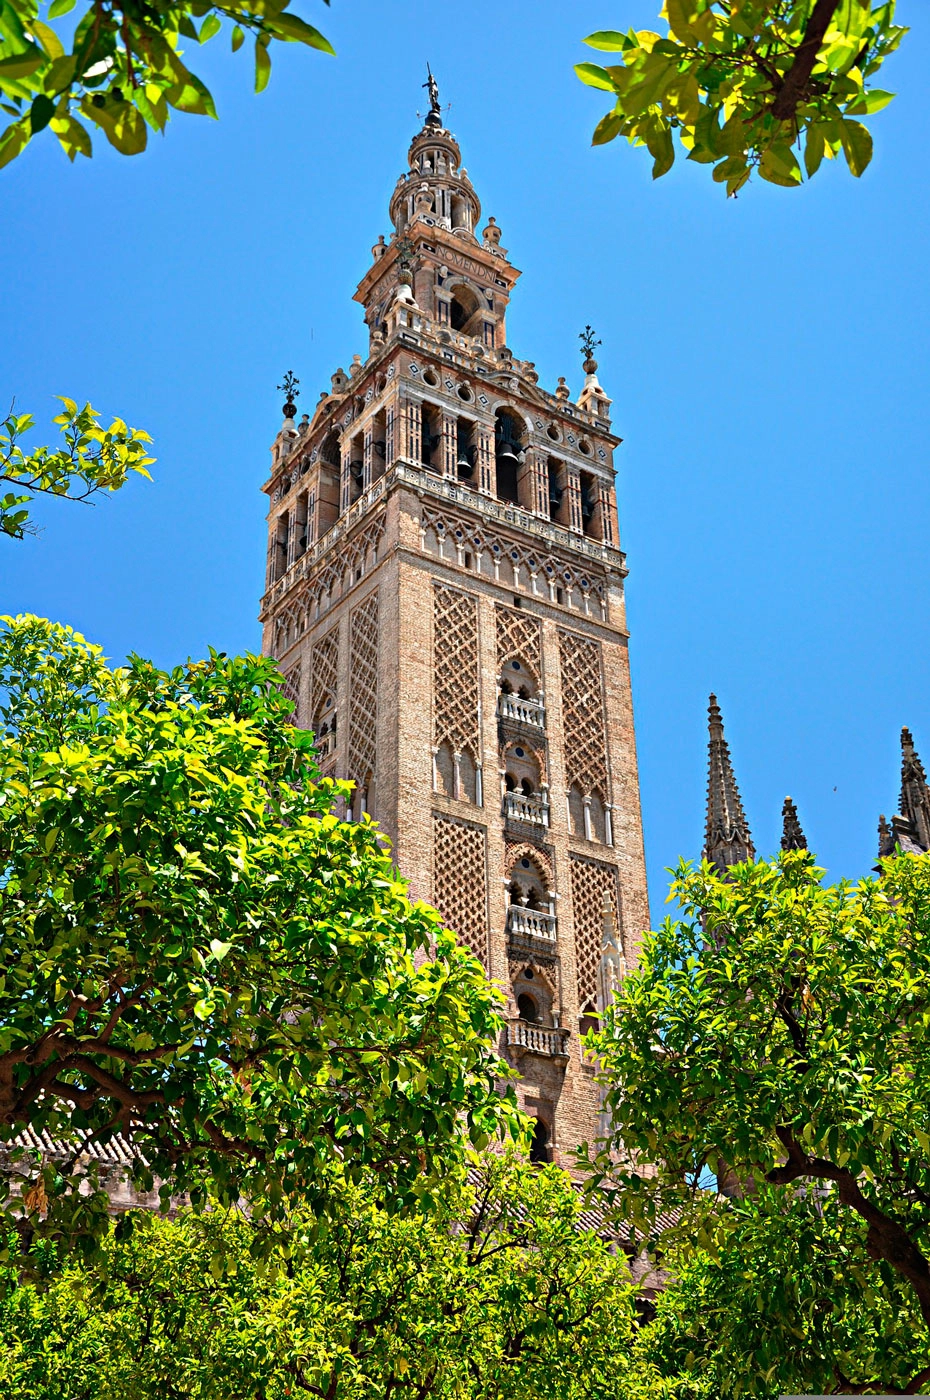 Tickets to see the Giralda